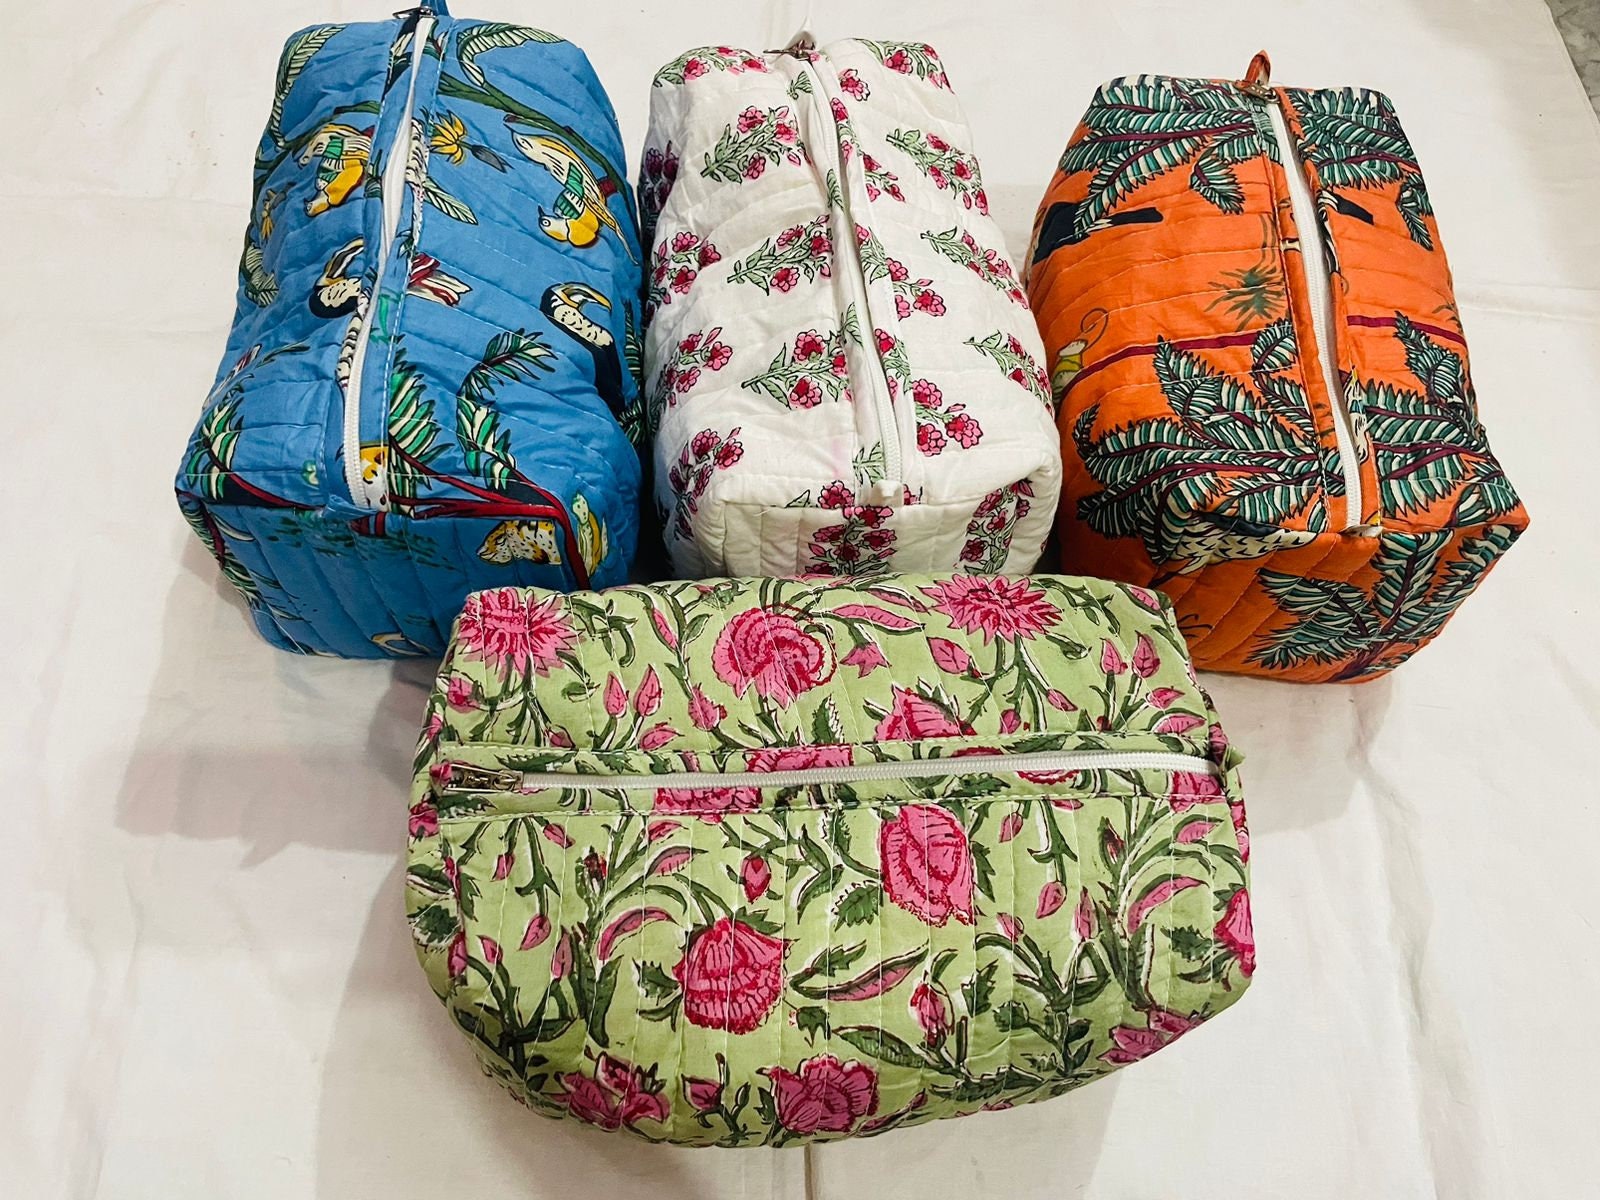 Block Print Designer Toiletry Bag & Makeup Case - Boho Floral Quilted Pouch  for Cosmetics, Skincare - Large Waterproof Lined Organizer for Diaper Bag